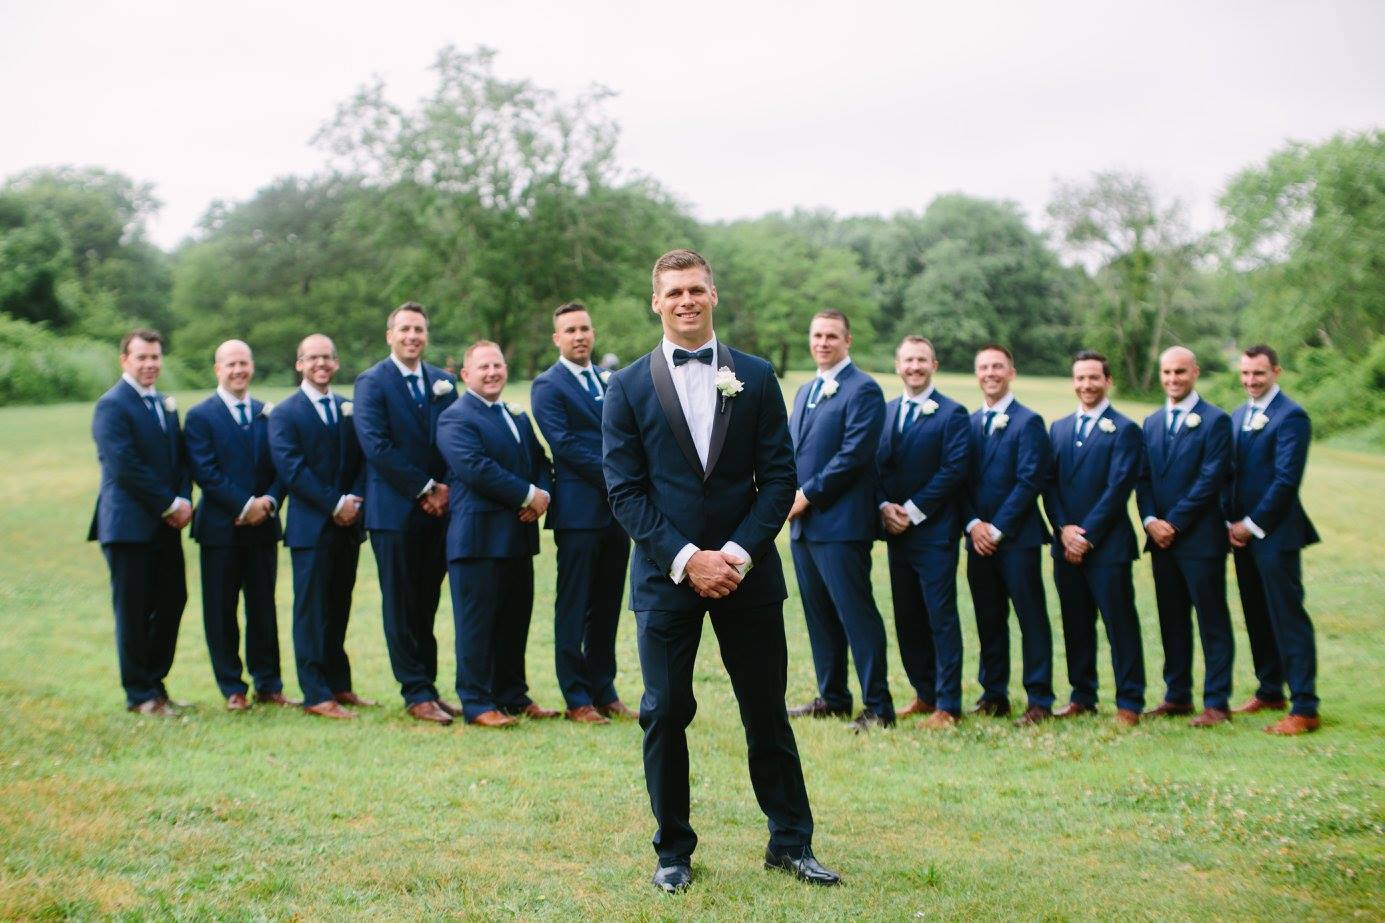 Groomsmen Wedding Party Package Deal- Save 17% - The Suit Spot